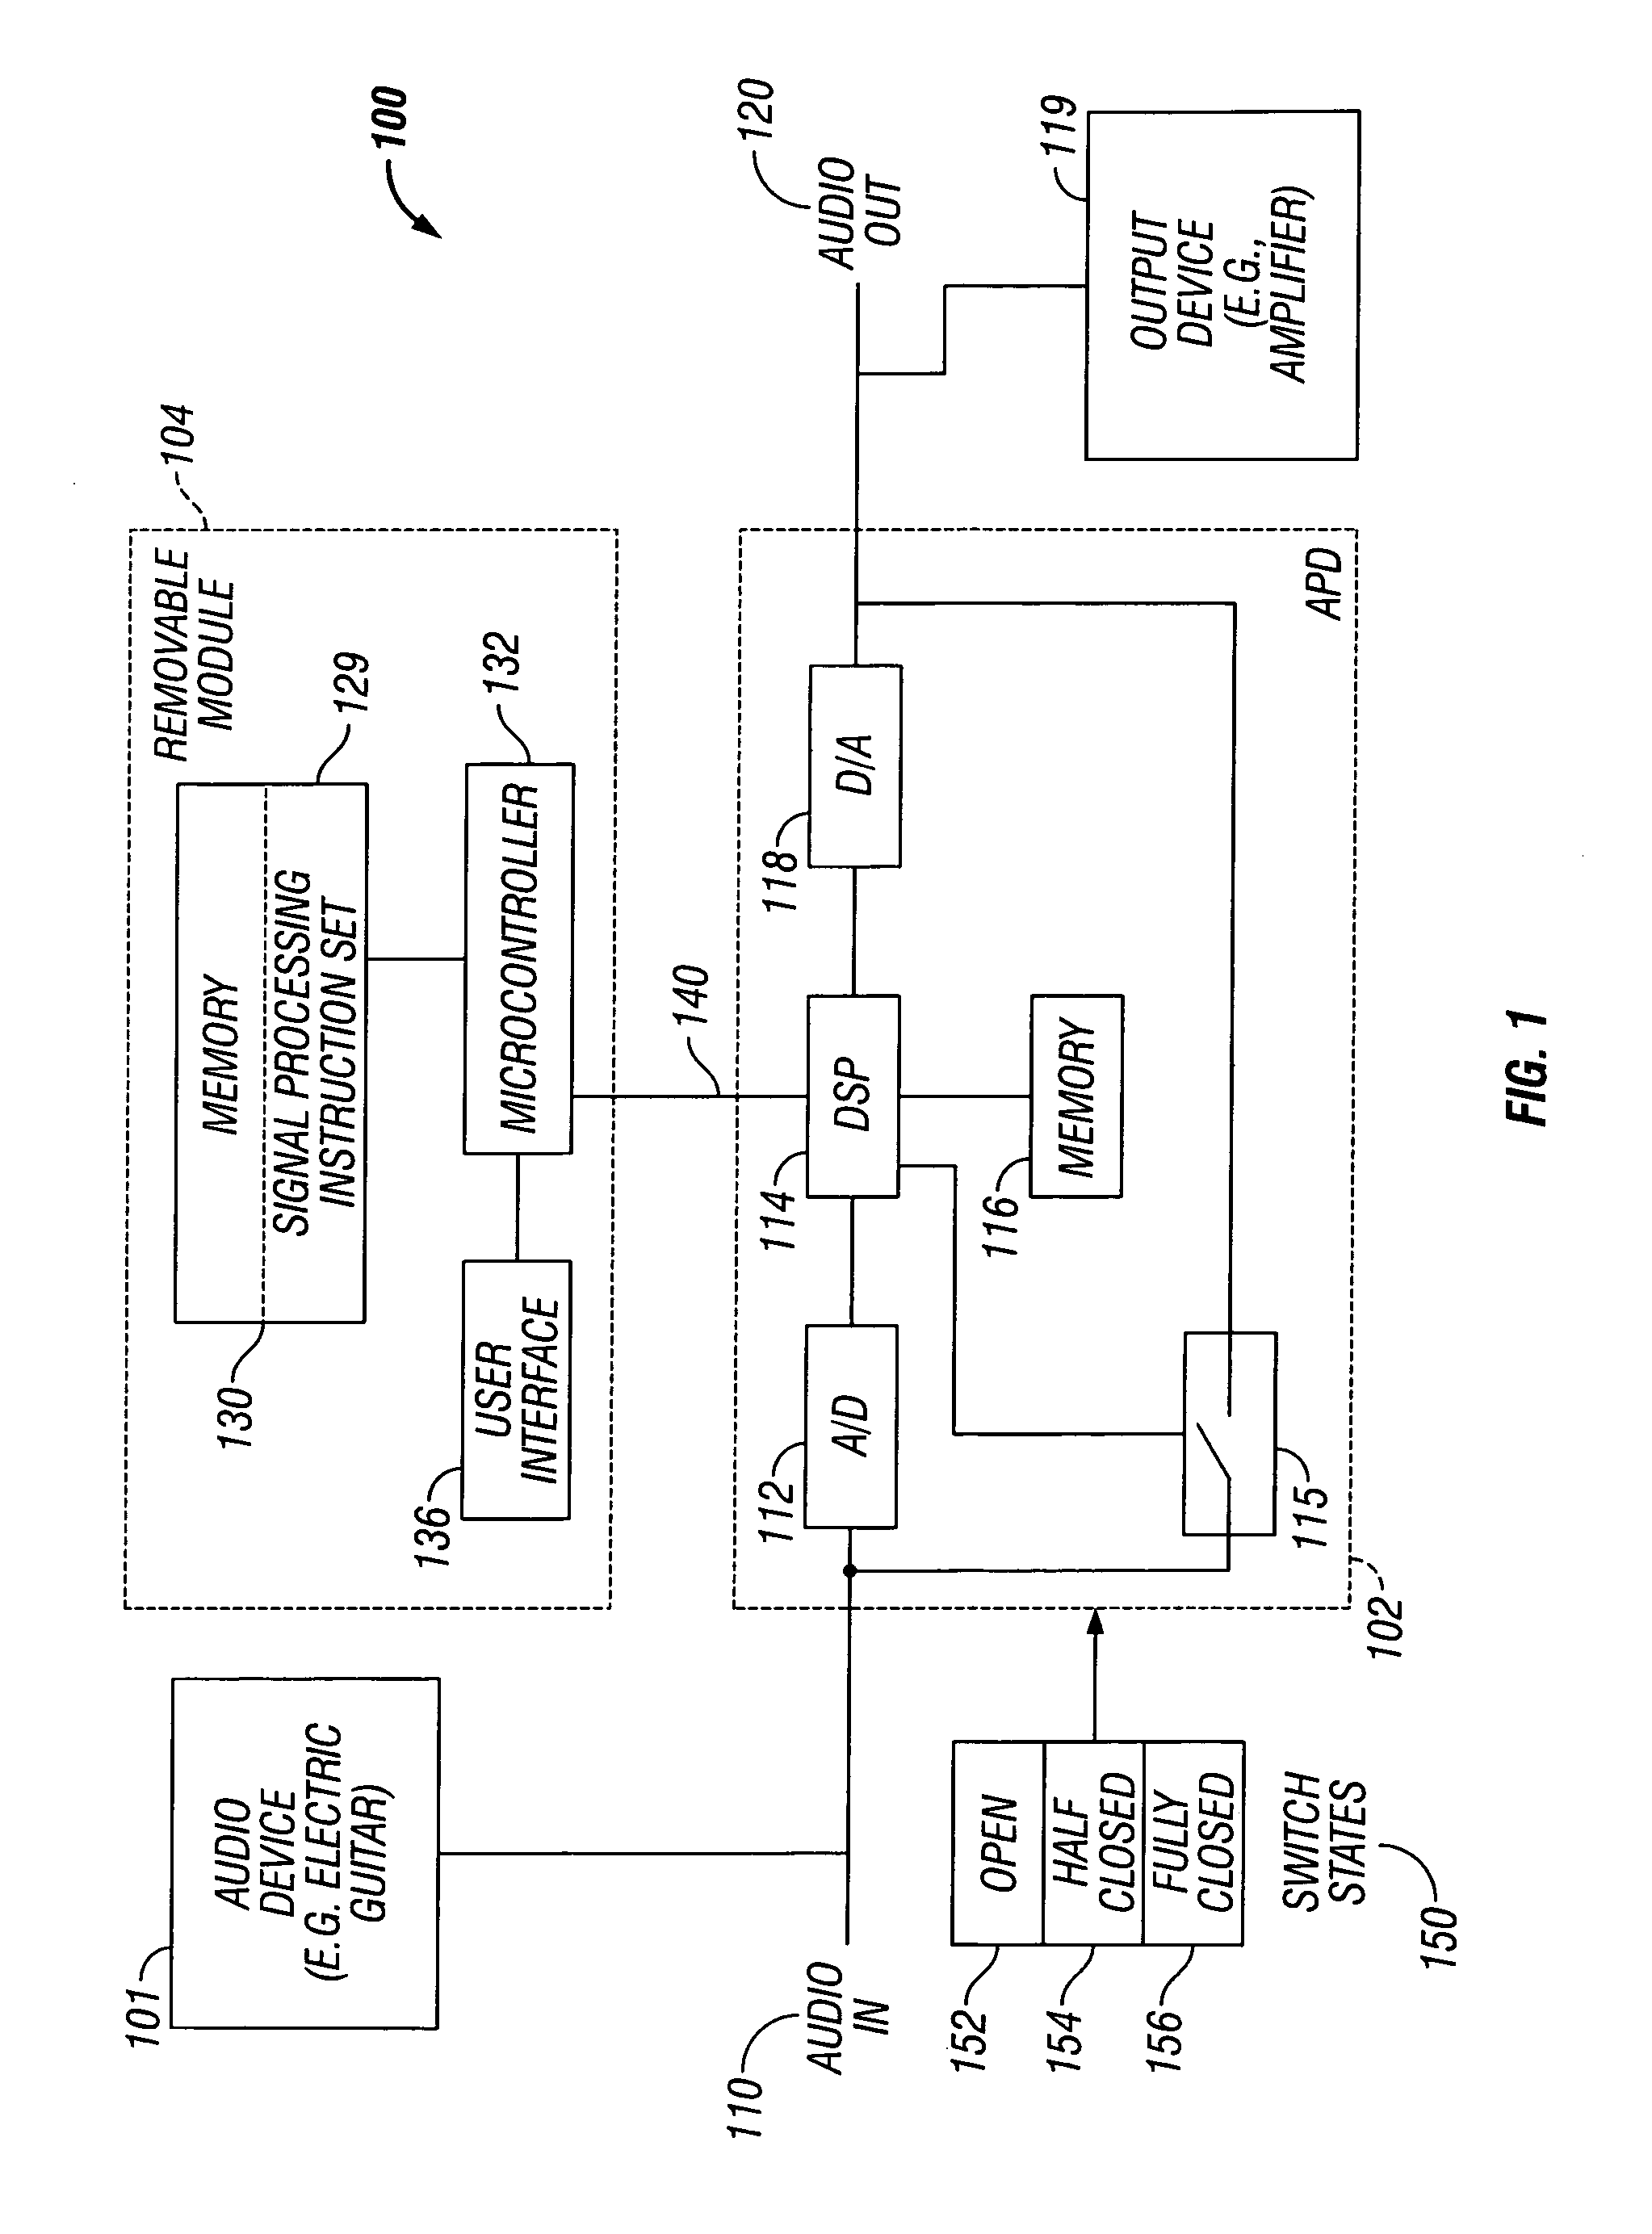 Audio signal processor with modular user interface and processing functionality